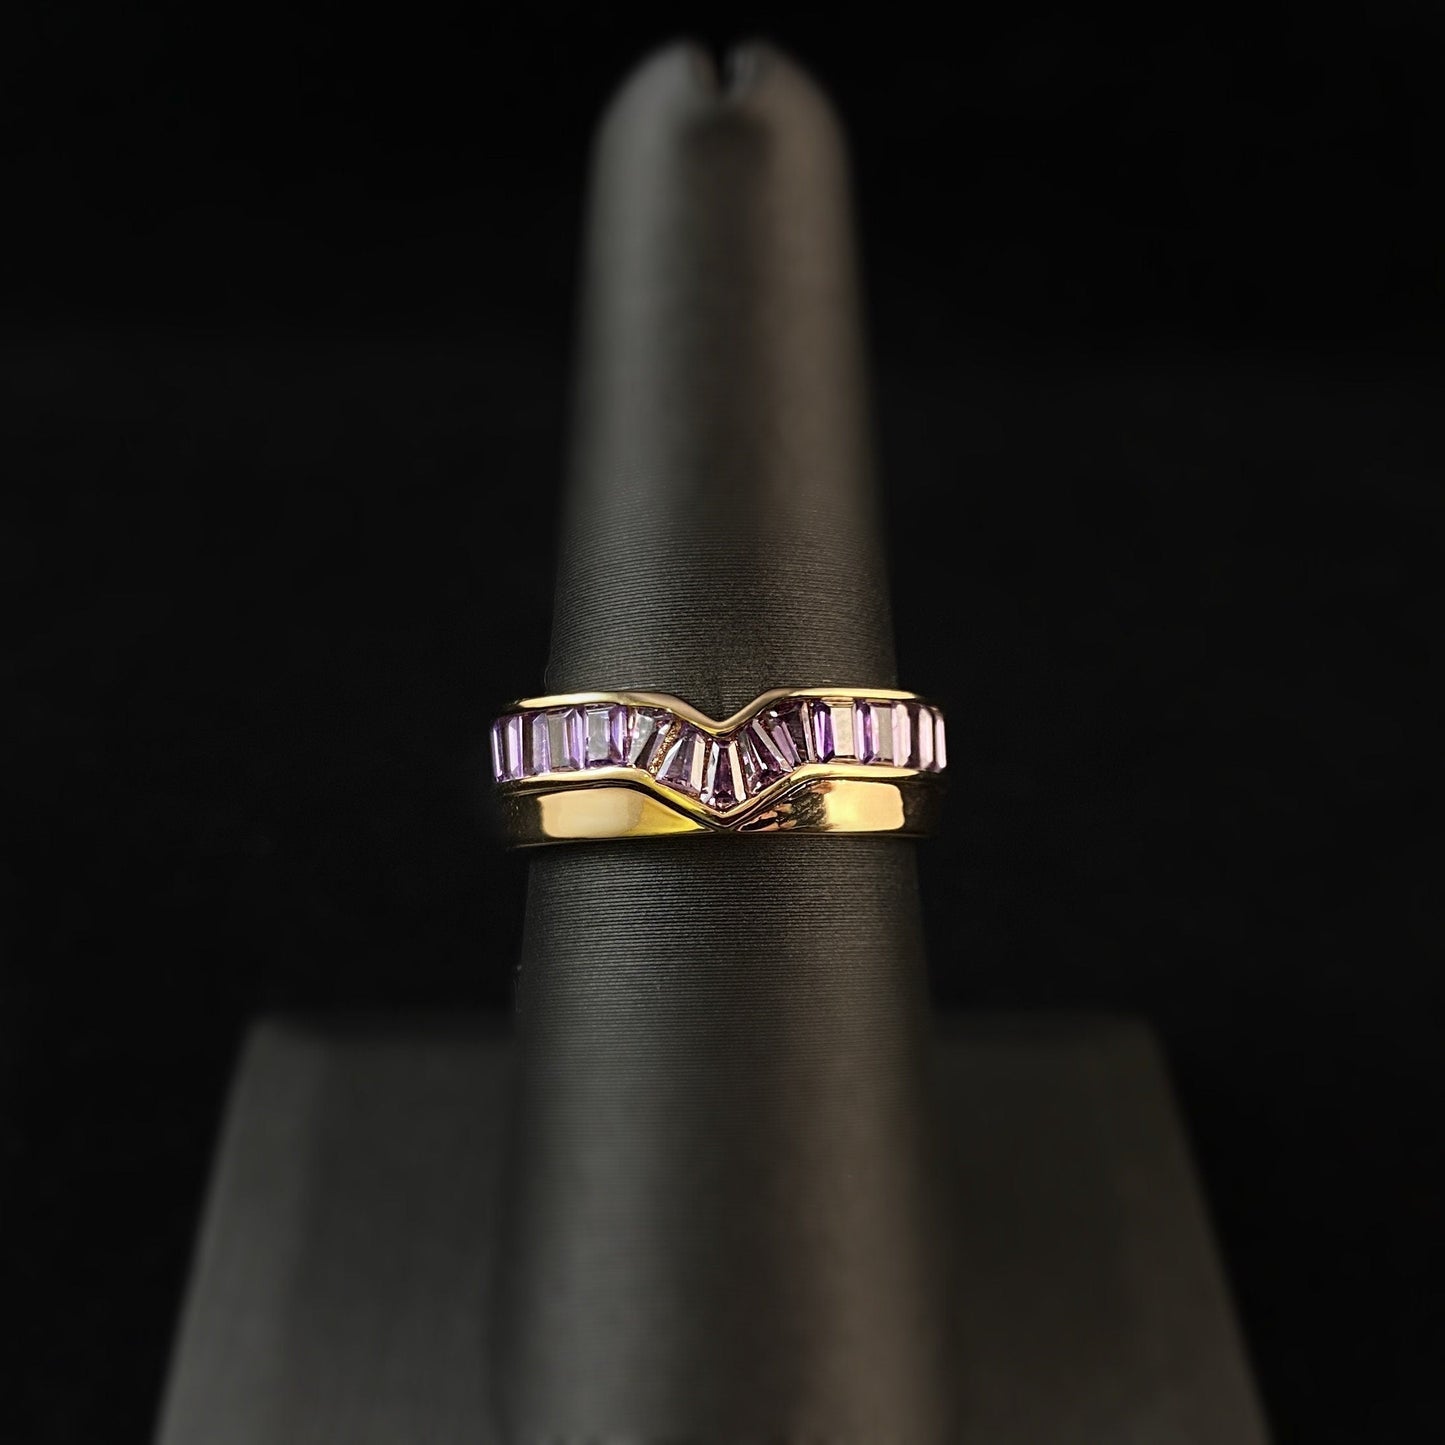 1920s Art Deco Style Gold Ring with Chevron Peak Amethyst - Size 7